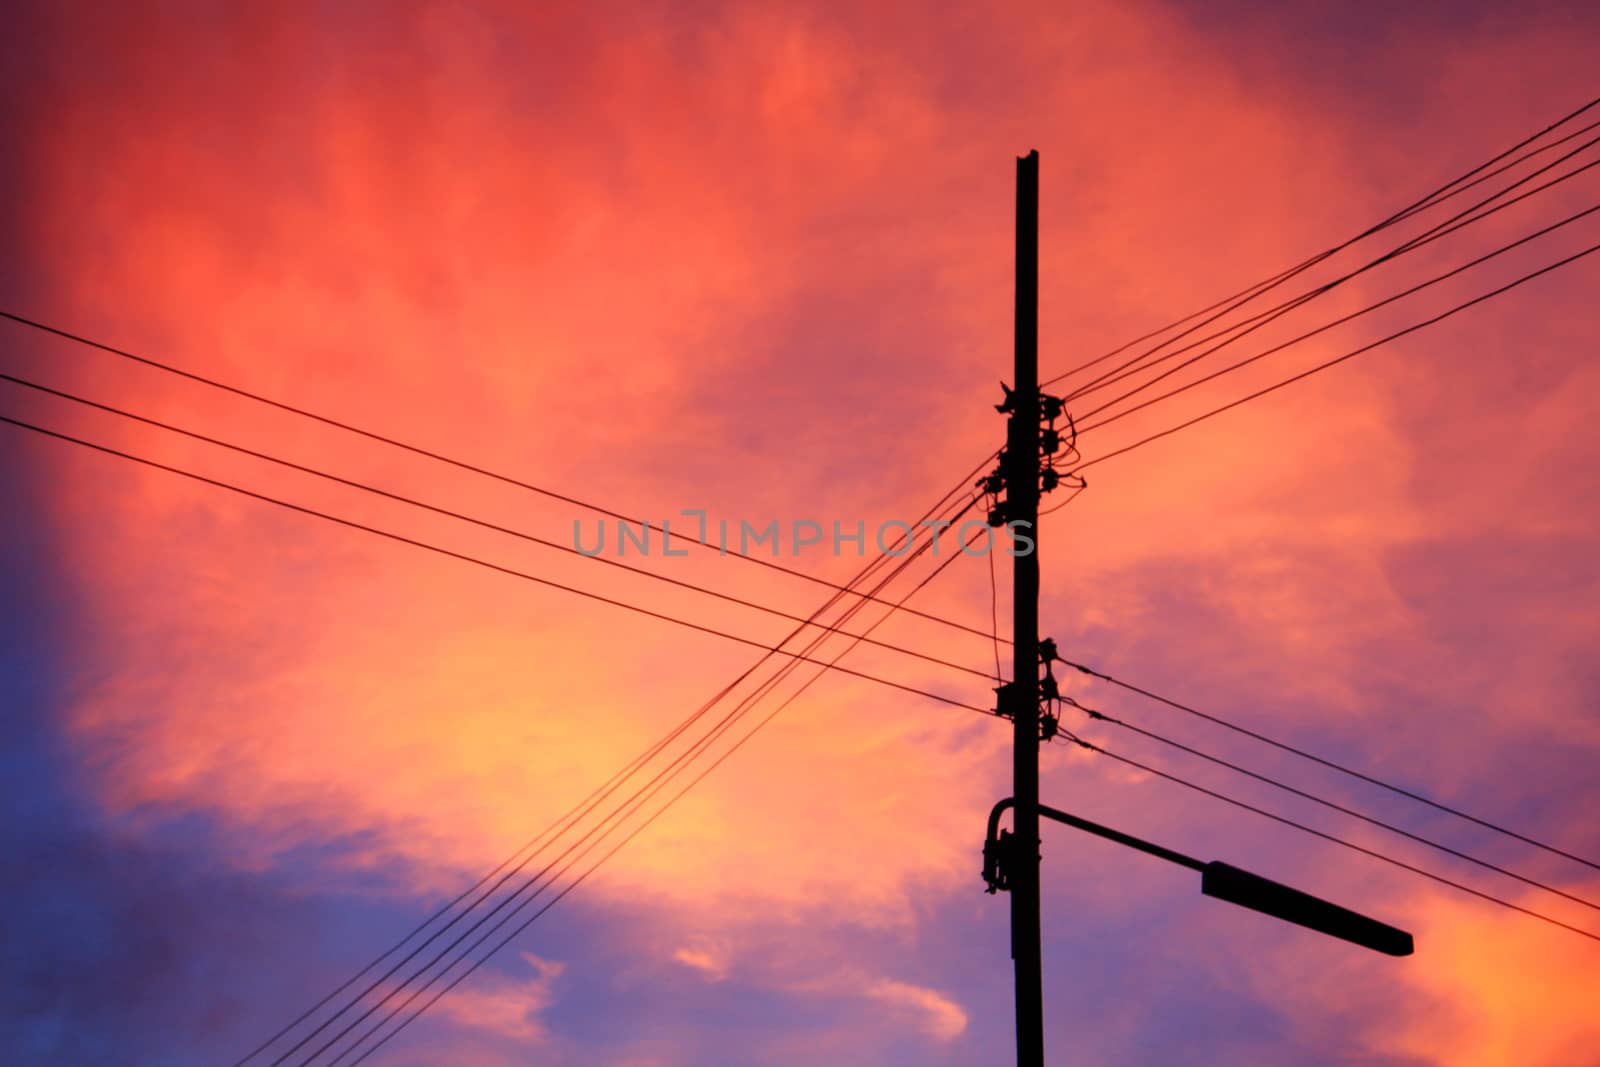 Sunset in Thailand and electricity pole by foto76